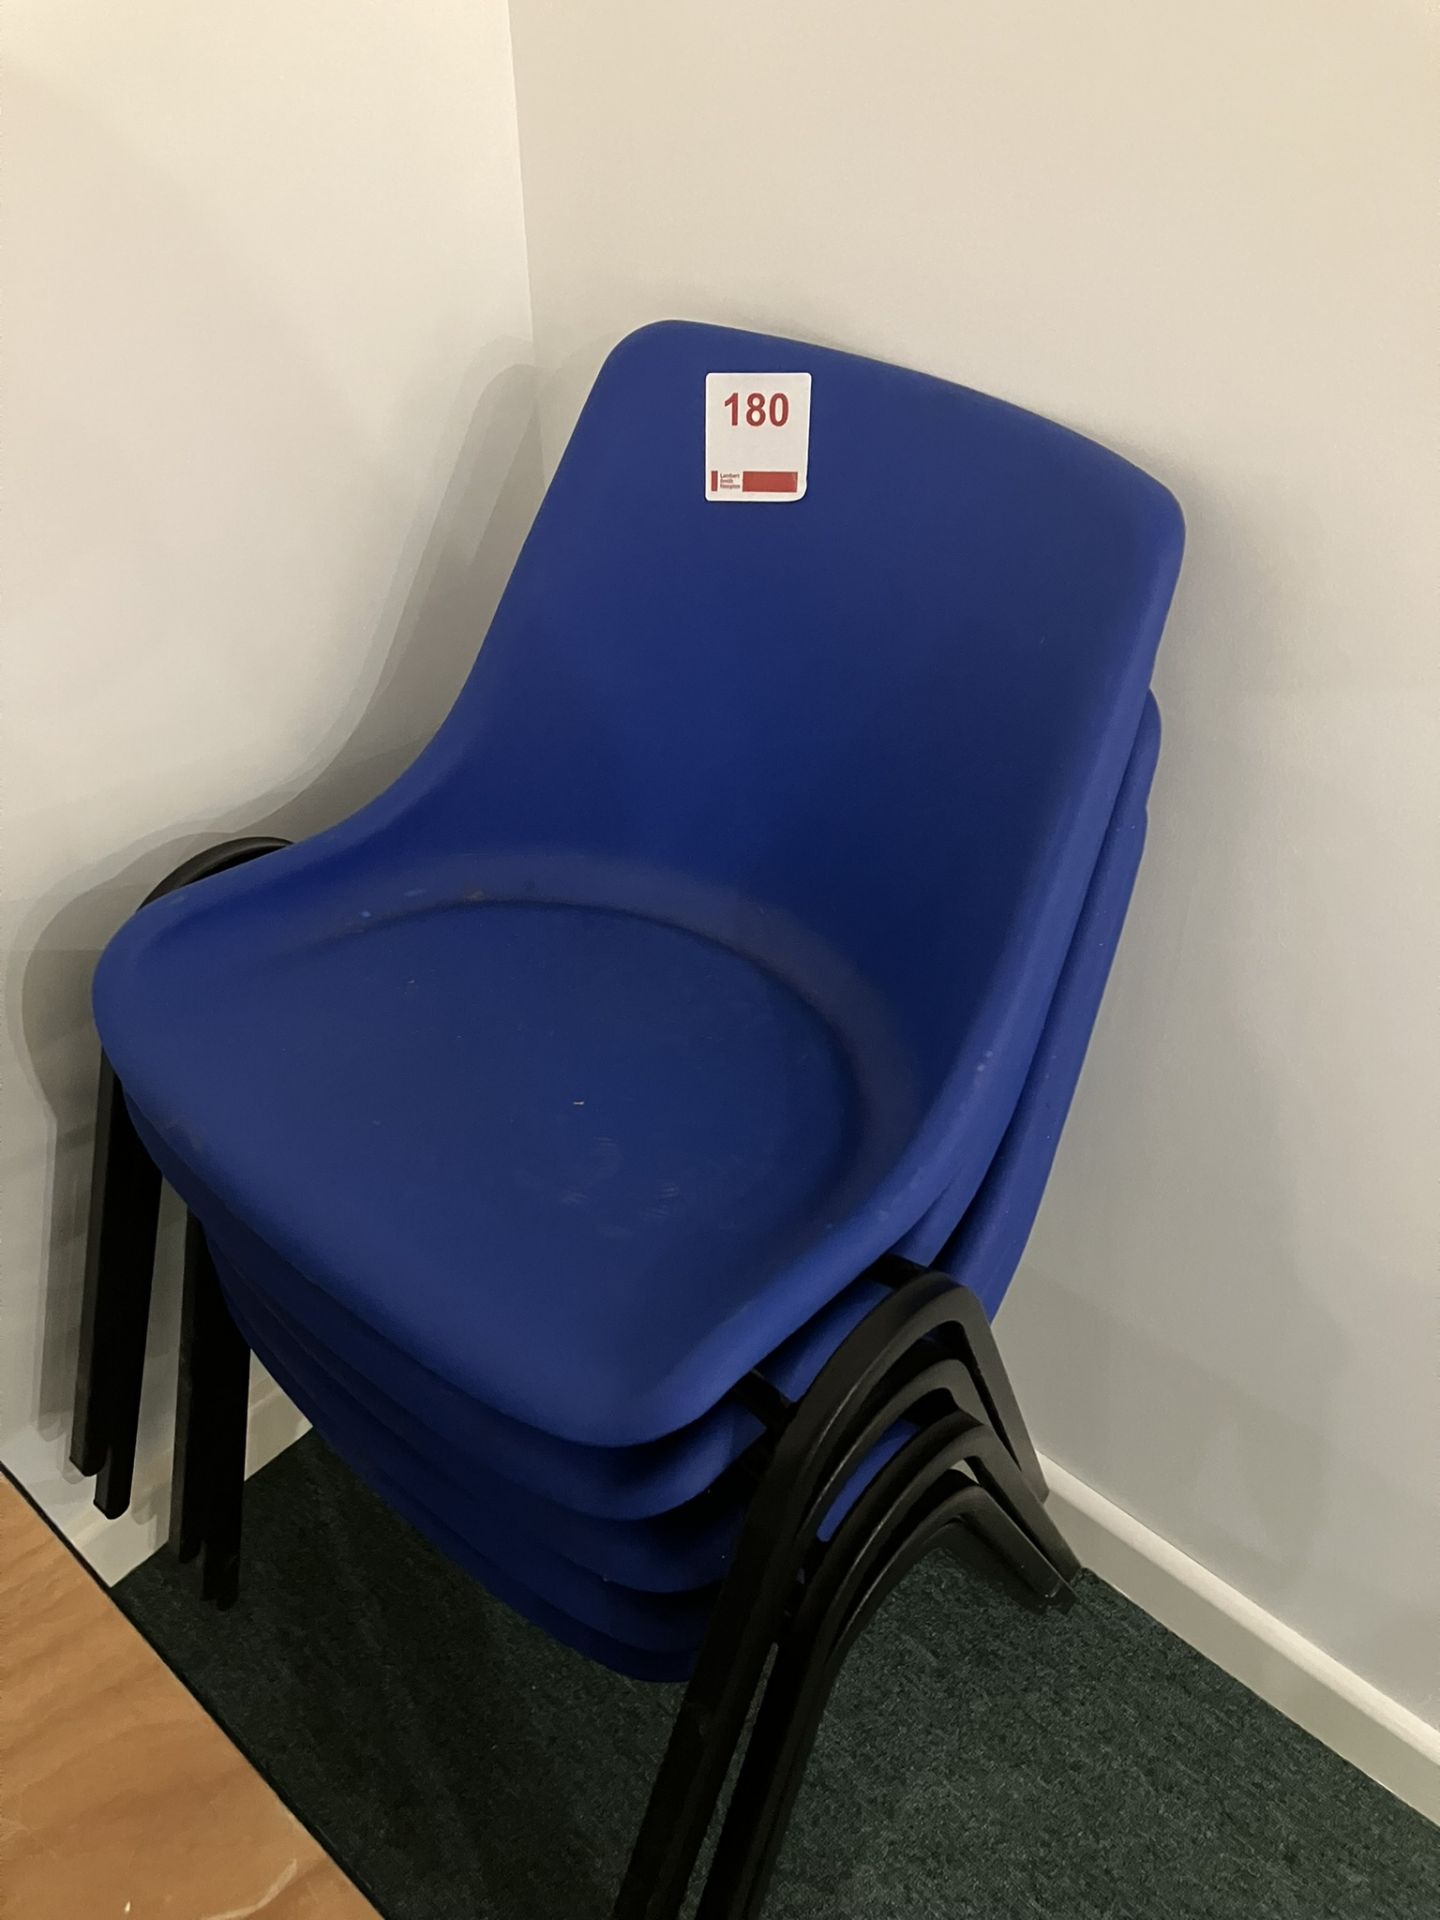 Six plastic chairs and blue upholstered chairs